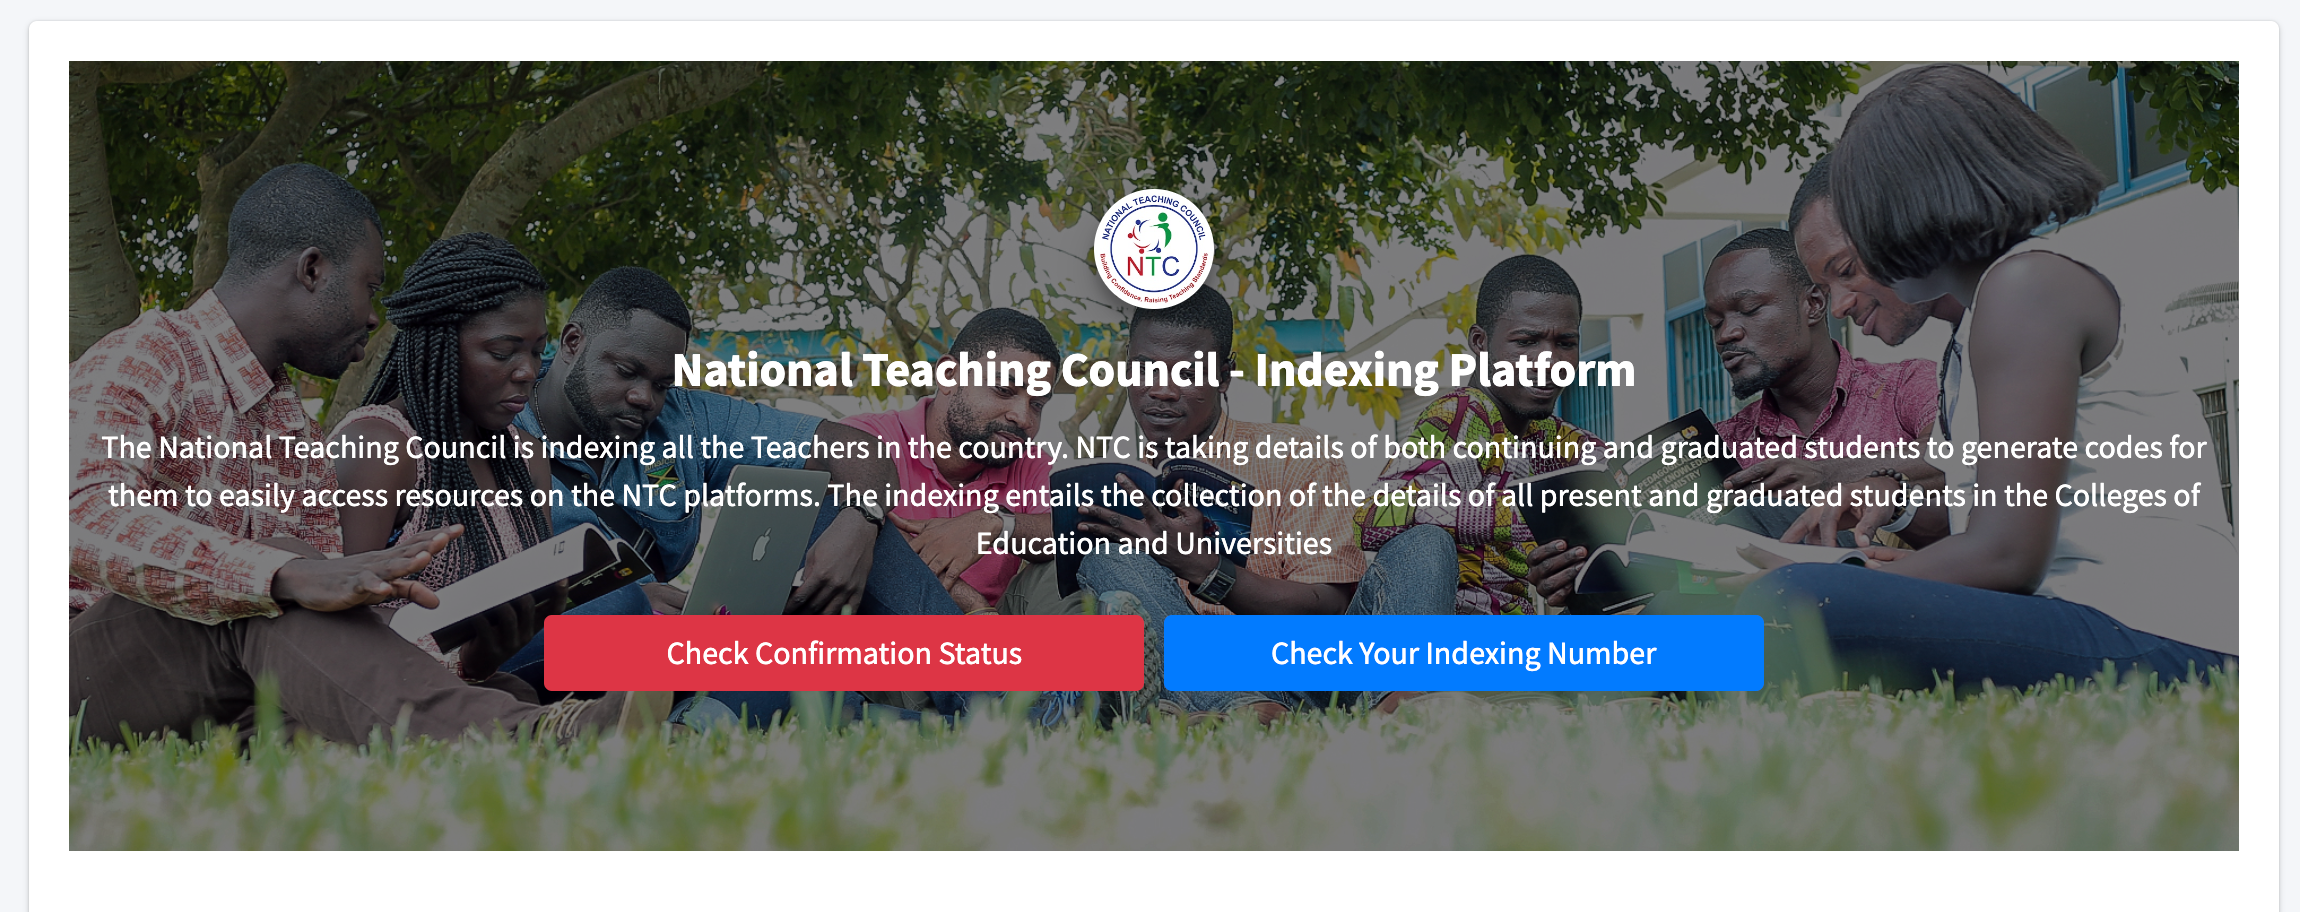 National Teaching Council Indexing Platform - How to Get GTLE Index Number